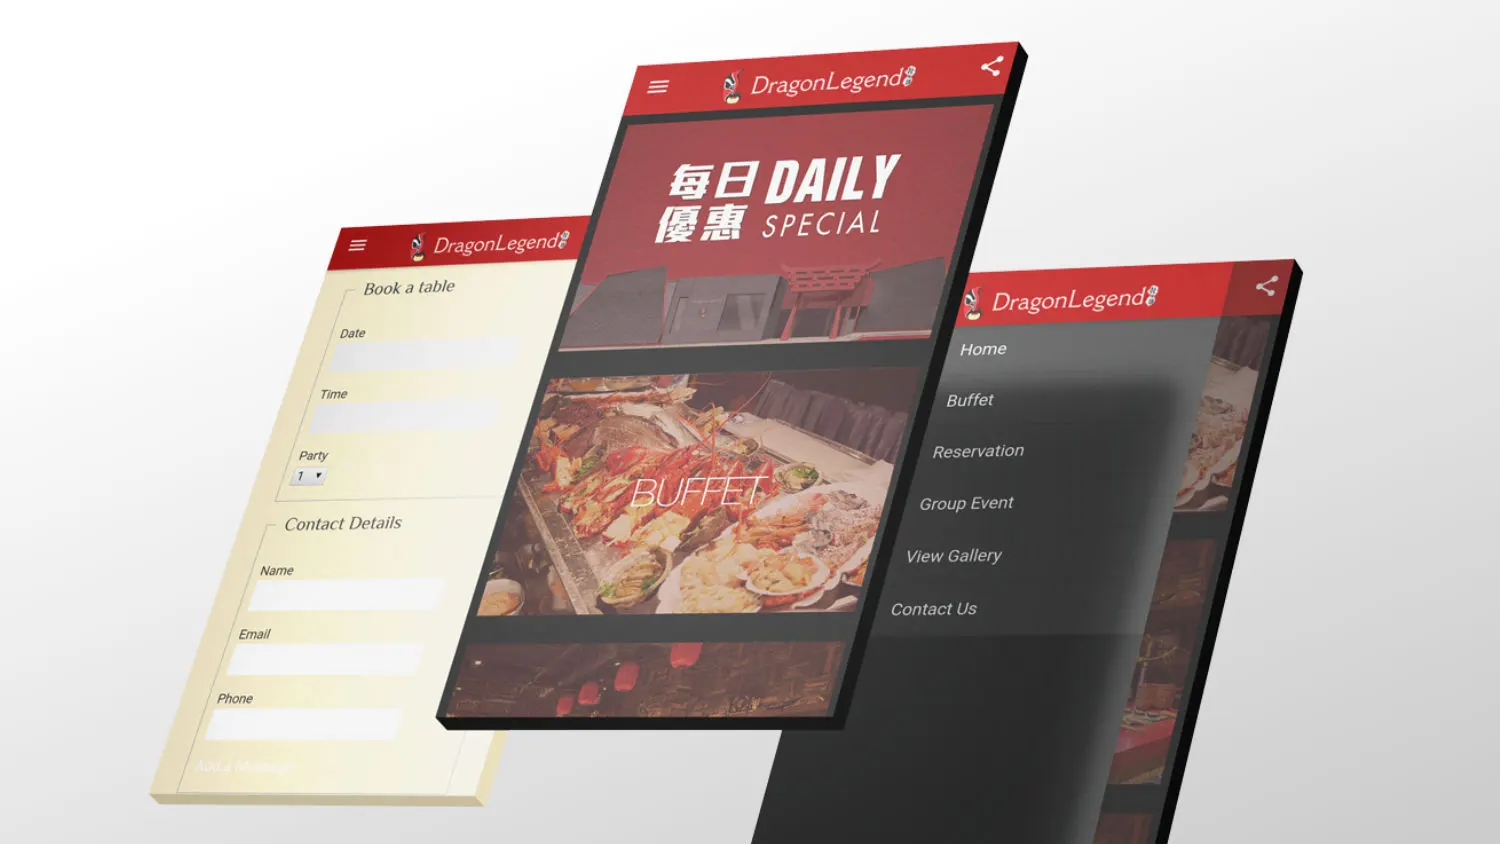 Digital marketing project for Dragon Legend 龍珠匯. Planned and executed mobile app system